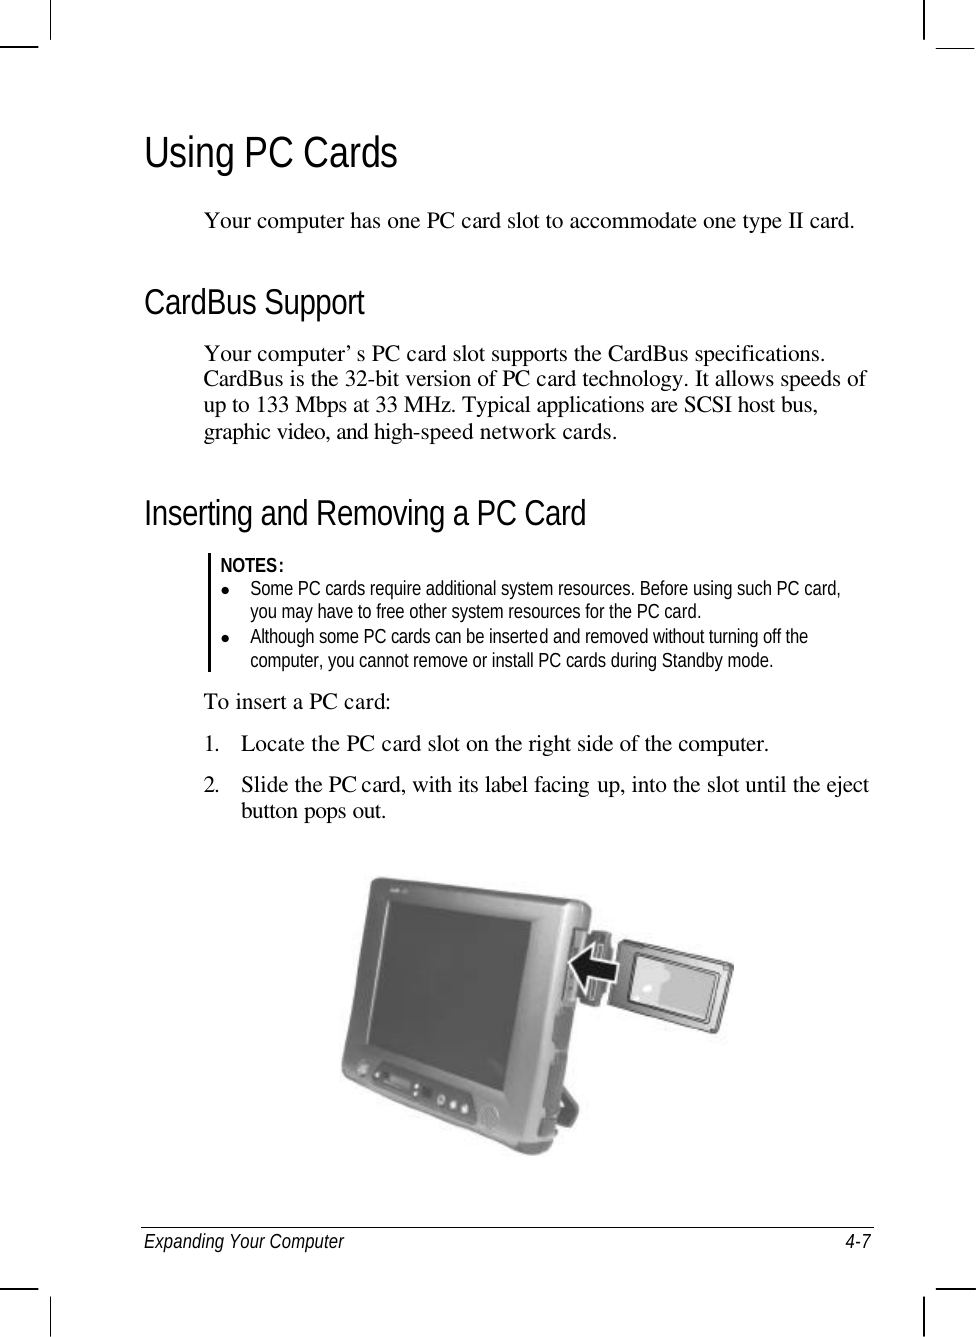  Expanding Your Computer 4-7 Using PC Cards Your computer has one PC card slot to accommodate one type II card. CardBus Support Your computer’s PC card slot supports the CardBus specifications. CardBus is the 32-bit version of PC card technology. It allows speeds of up to 133 Mbps at 33 MHz. Typical applications are SCSI host bus, graphic video, and high-speed network cards. Inserting and Removing a PC Card NOTES: l Some PC cards require additional system resources. Before using such PC card, you may have to free other system resources for the PC card. l Although some PC cards can be inserted and removed without turning off the computer, you cannot remove or install PC cards during Standby mode.  To insert a PC card: 1. Locate the PC card slot on the right side of the computer. 2. Slide the PC card, with its label facing up, into the slot until the eject button pops out.  